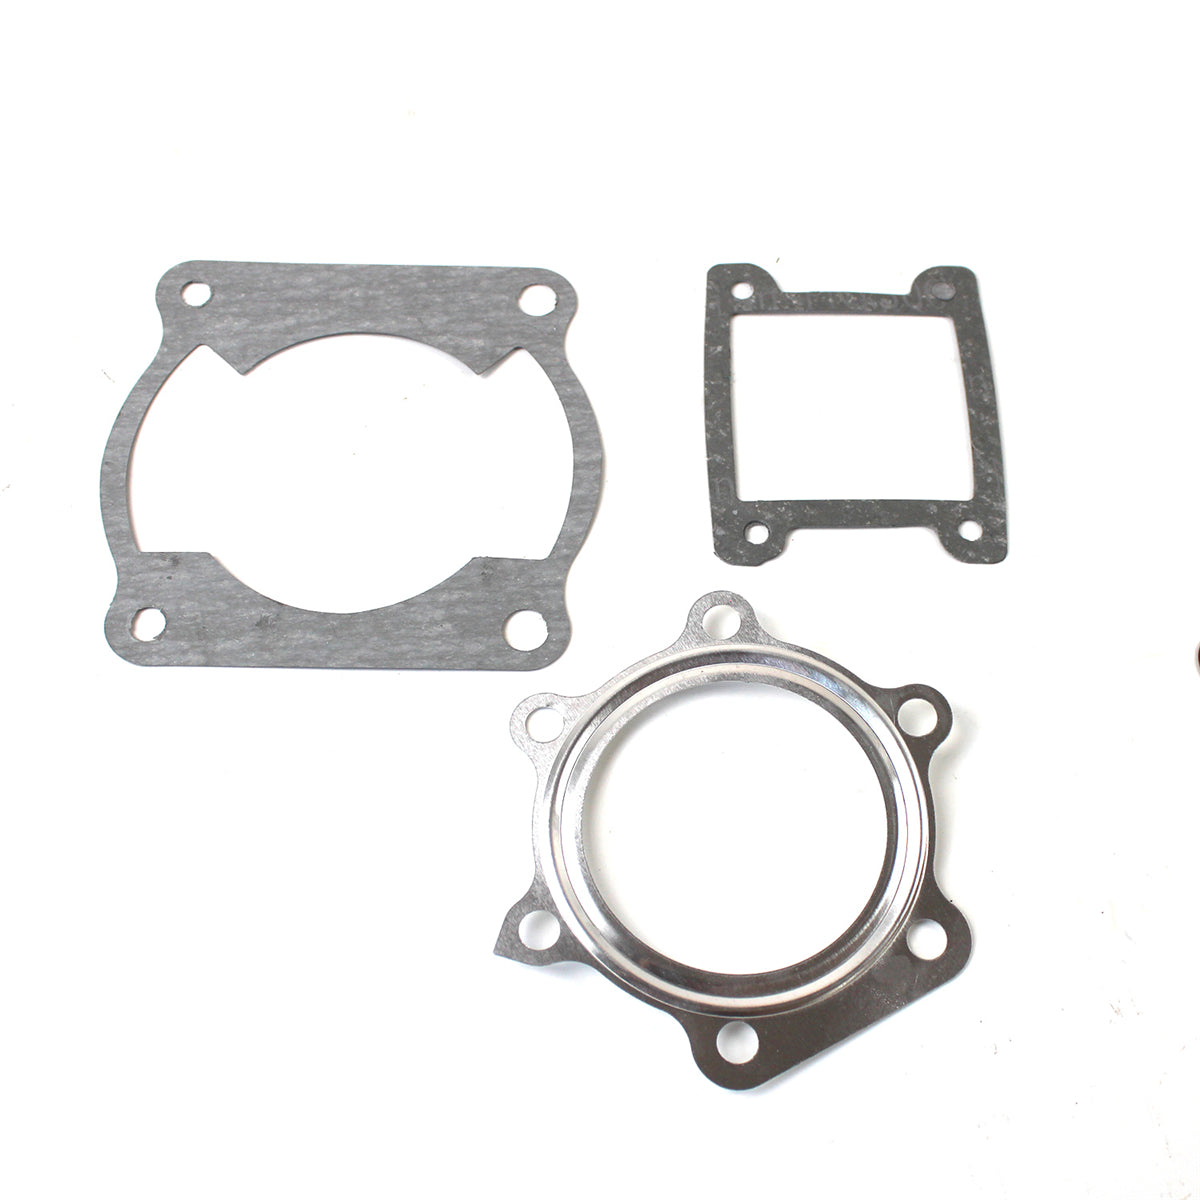 Daysyore® Cylinder Wiseco Piston Gasket Top End Kit for 1988-2006 Yamaha Blaster 200 YFS200